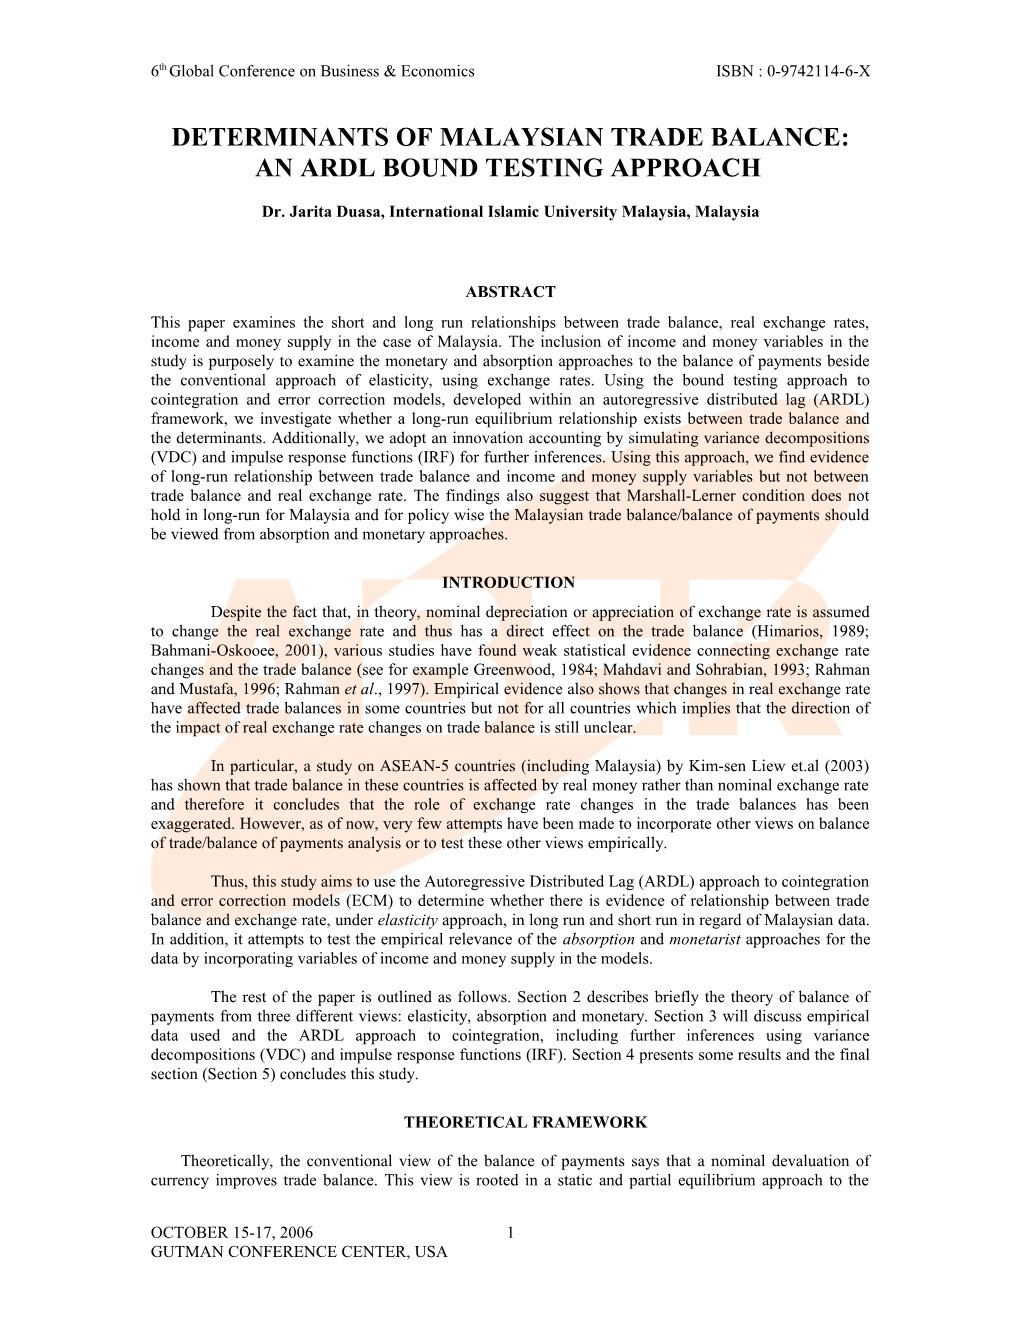 Determinants of Malaysian Trade Balance: an Ardl Bound Testing Approach